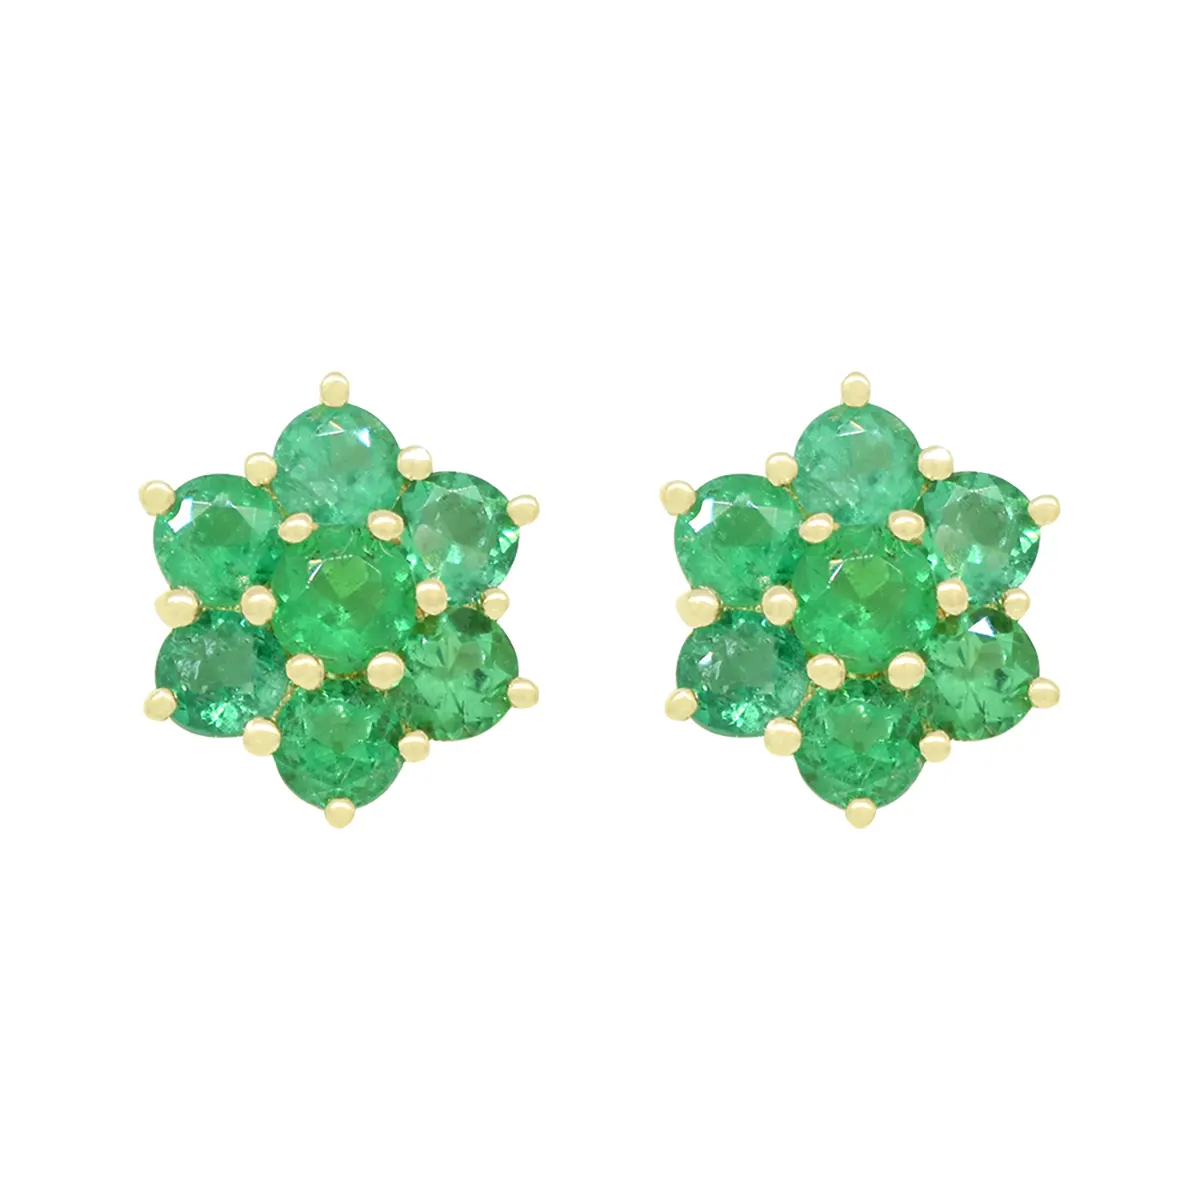 Cluster emerald earrings in 18K yellow gold with 1.30 Ct. t.w. in 14 round cut genuine natural Colombian emeralds